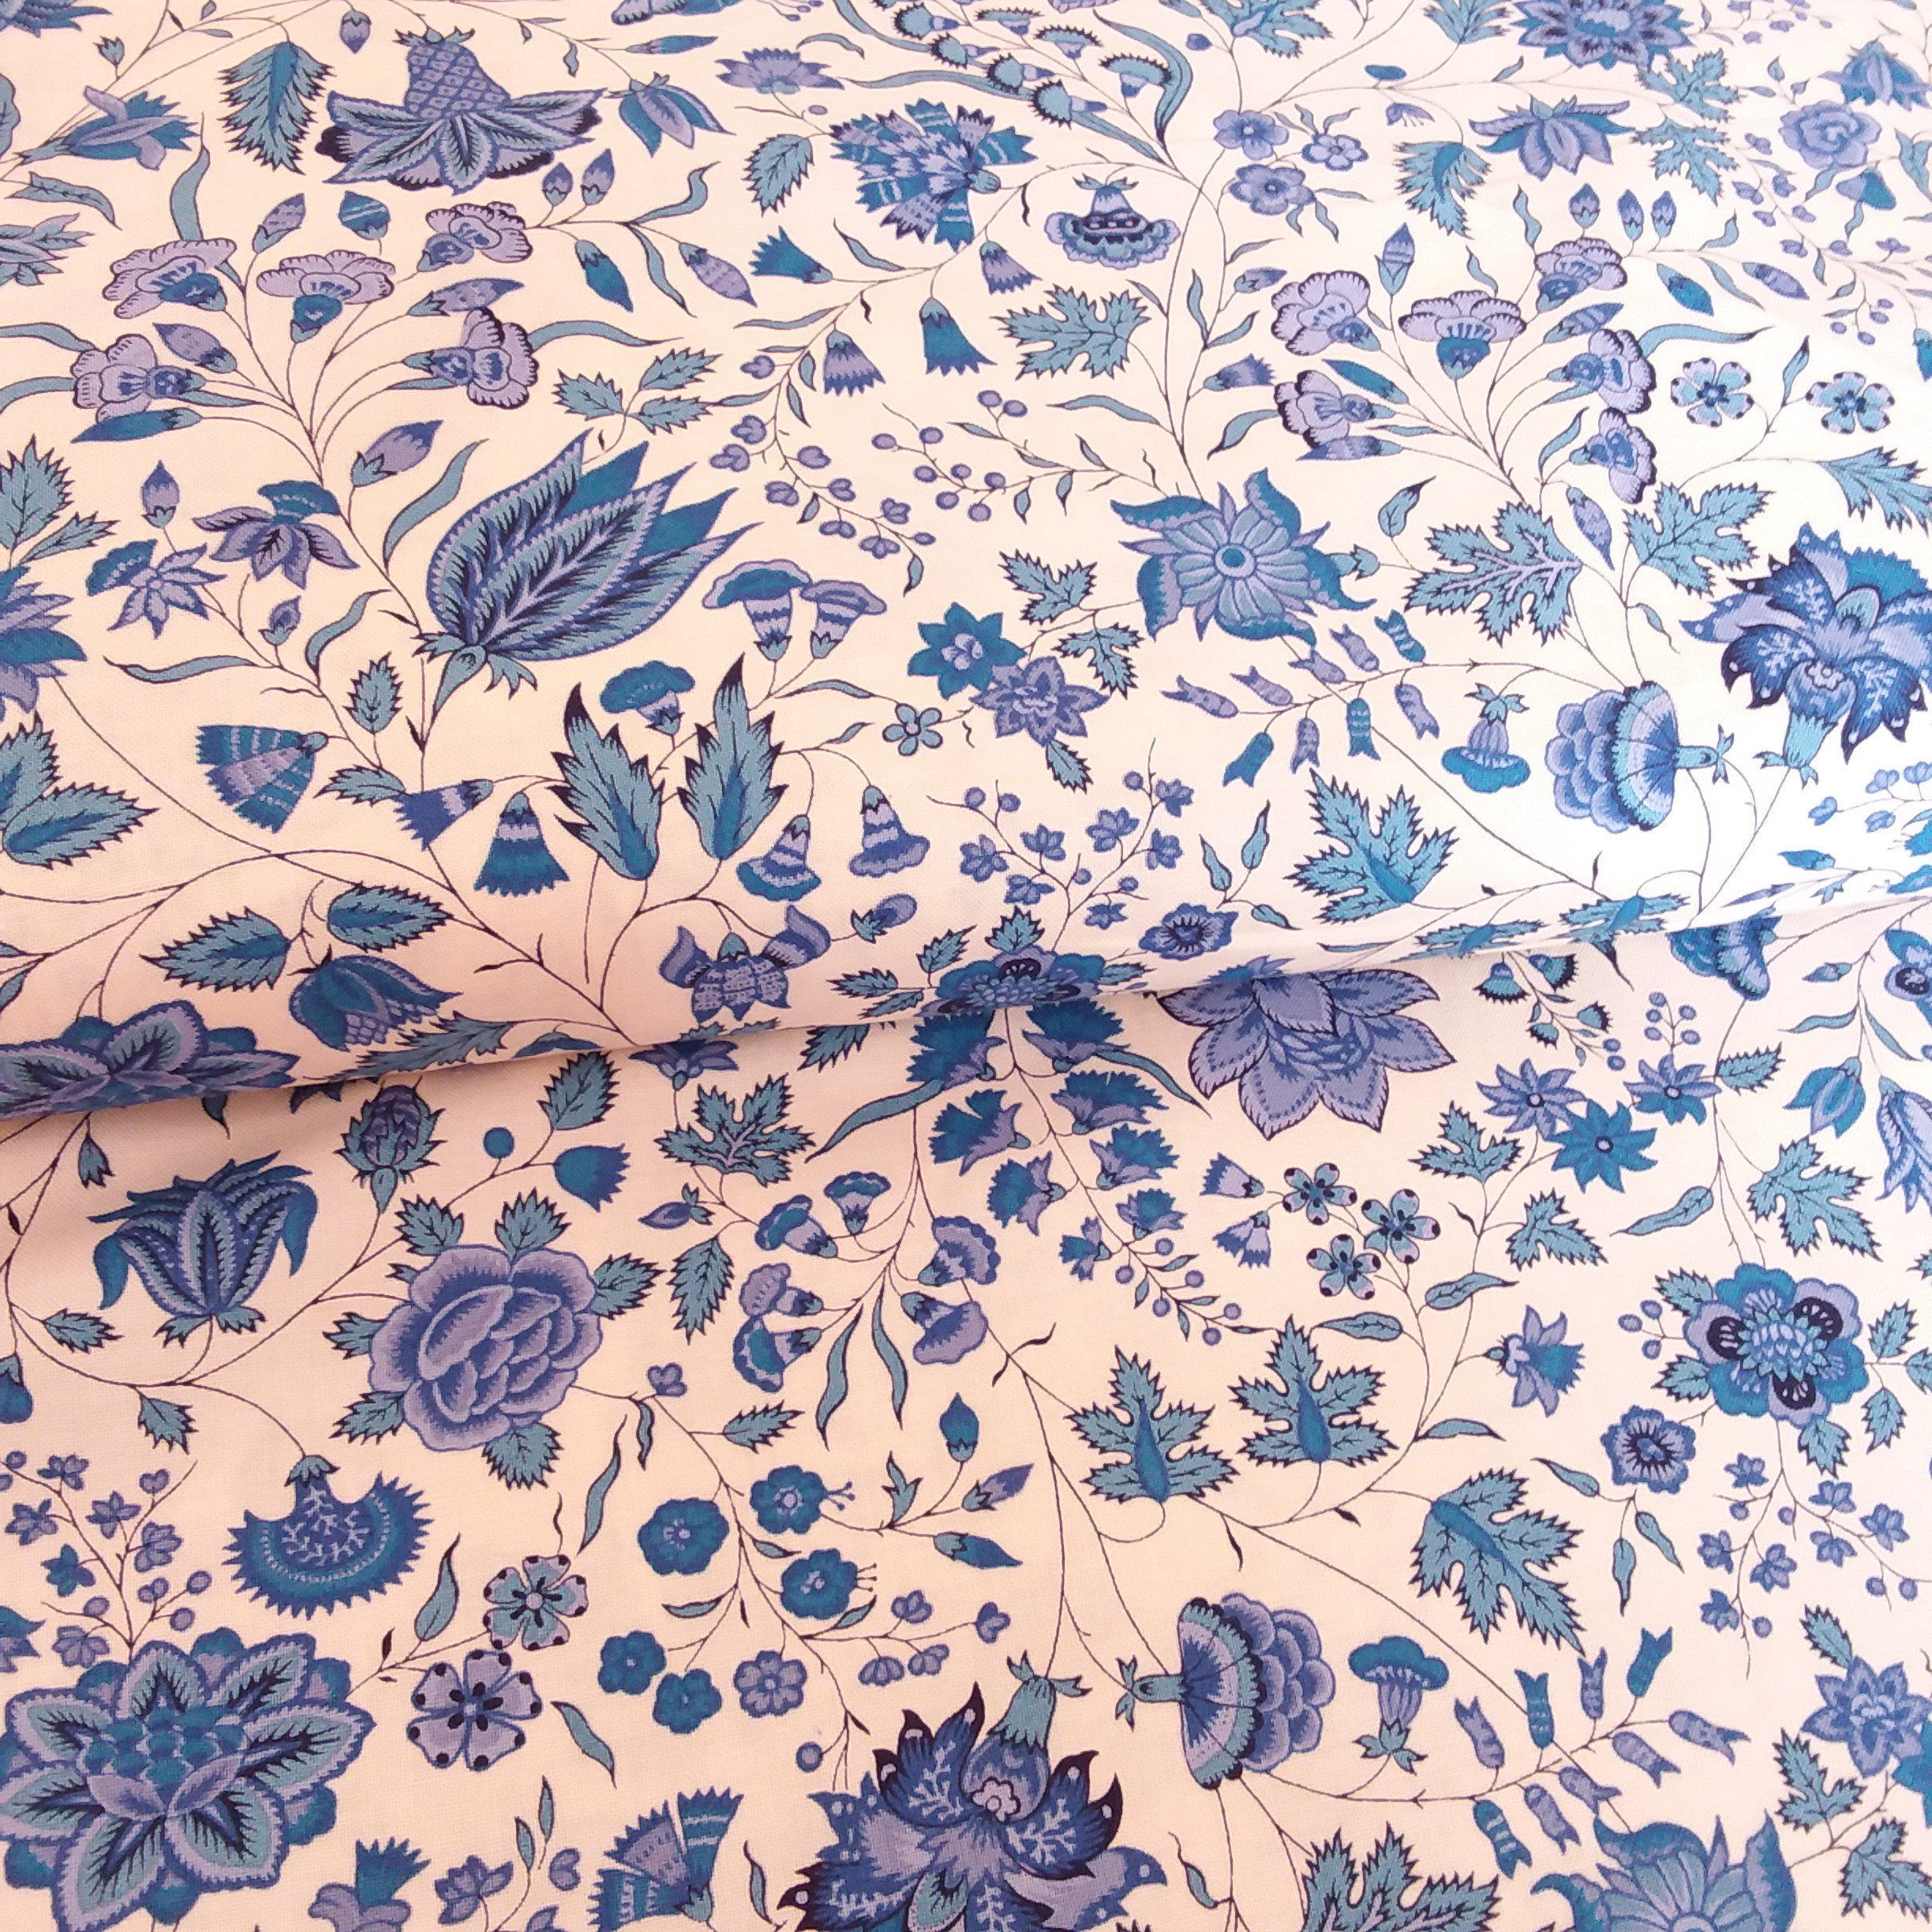 Royal Blue Color 22mm Silk Satin Fabric for Dress, Pillowcases, Pajamas,  Evening Dress, DIY Handmade, Sell by the Yard, Made in China 